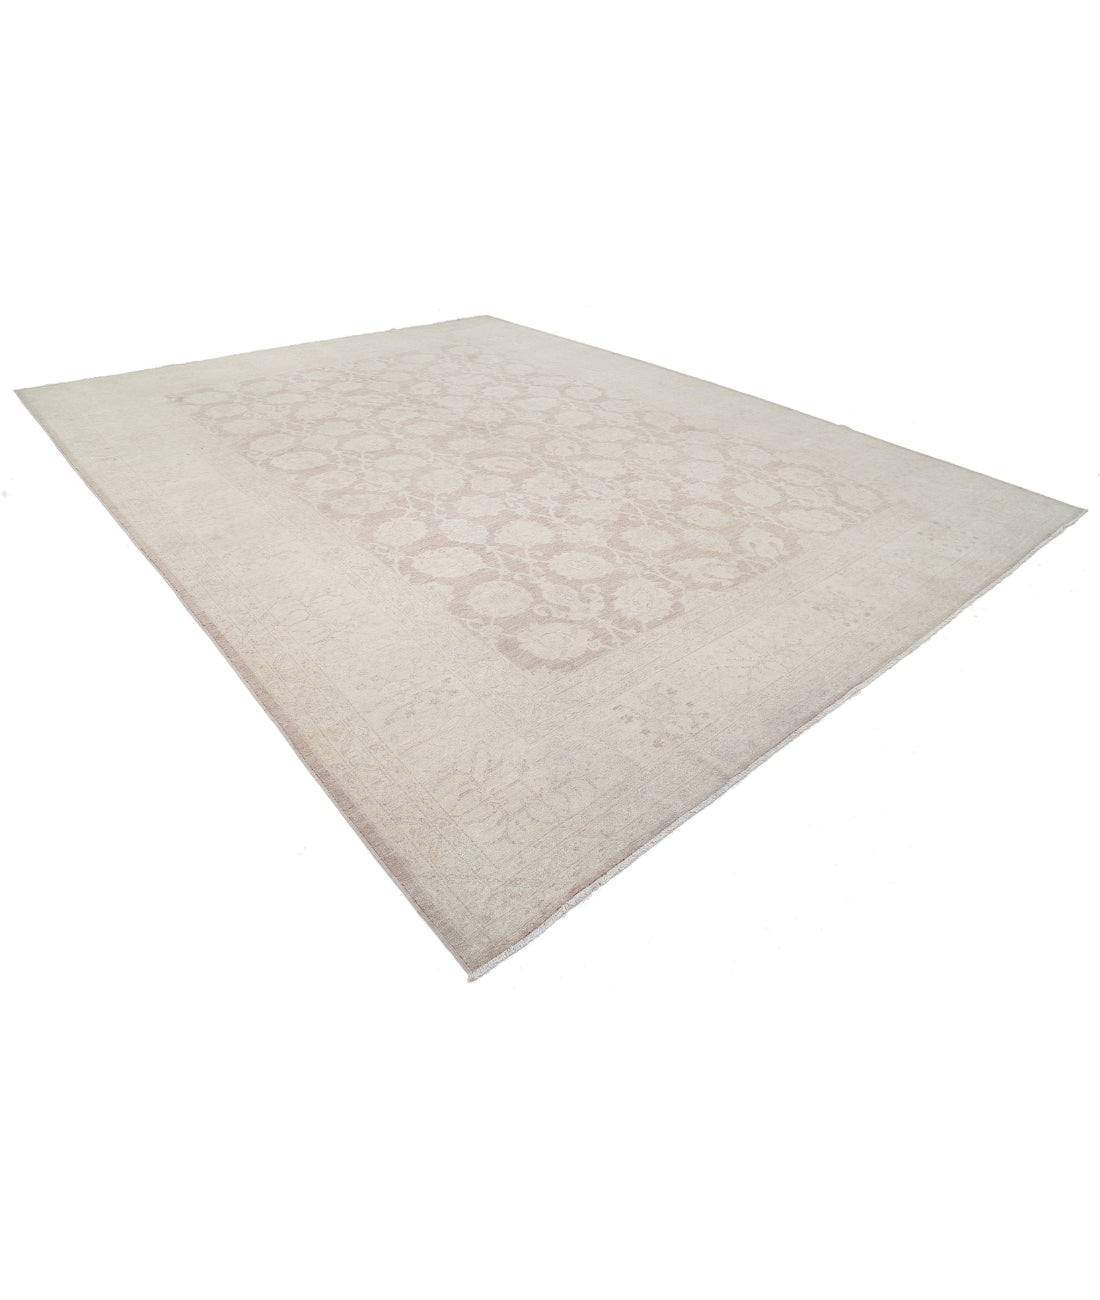 Hand Knotted Serenity Wool Rug - 11'6'' x 14'11'' 11'6'' x 14'11'' (345 X 448) / Taupe / Ivory